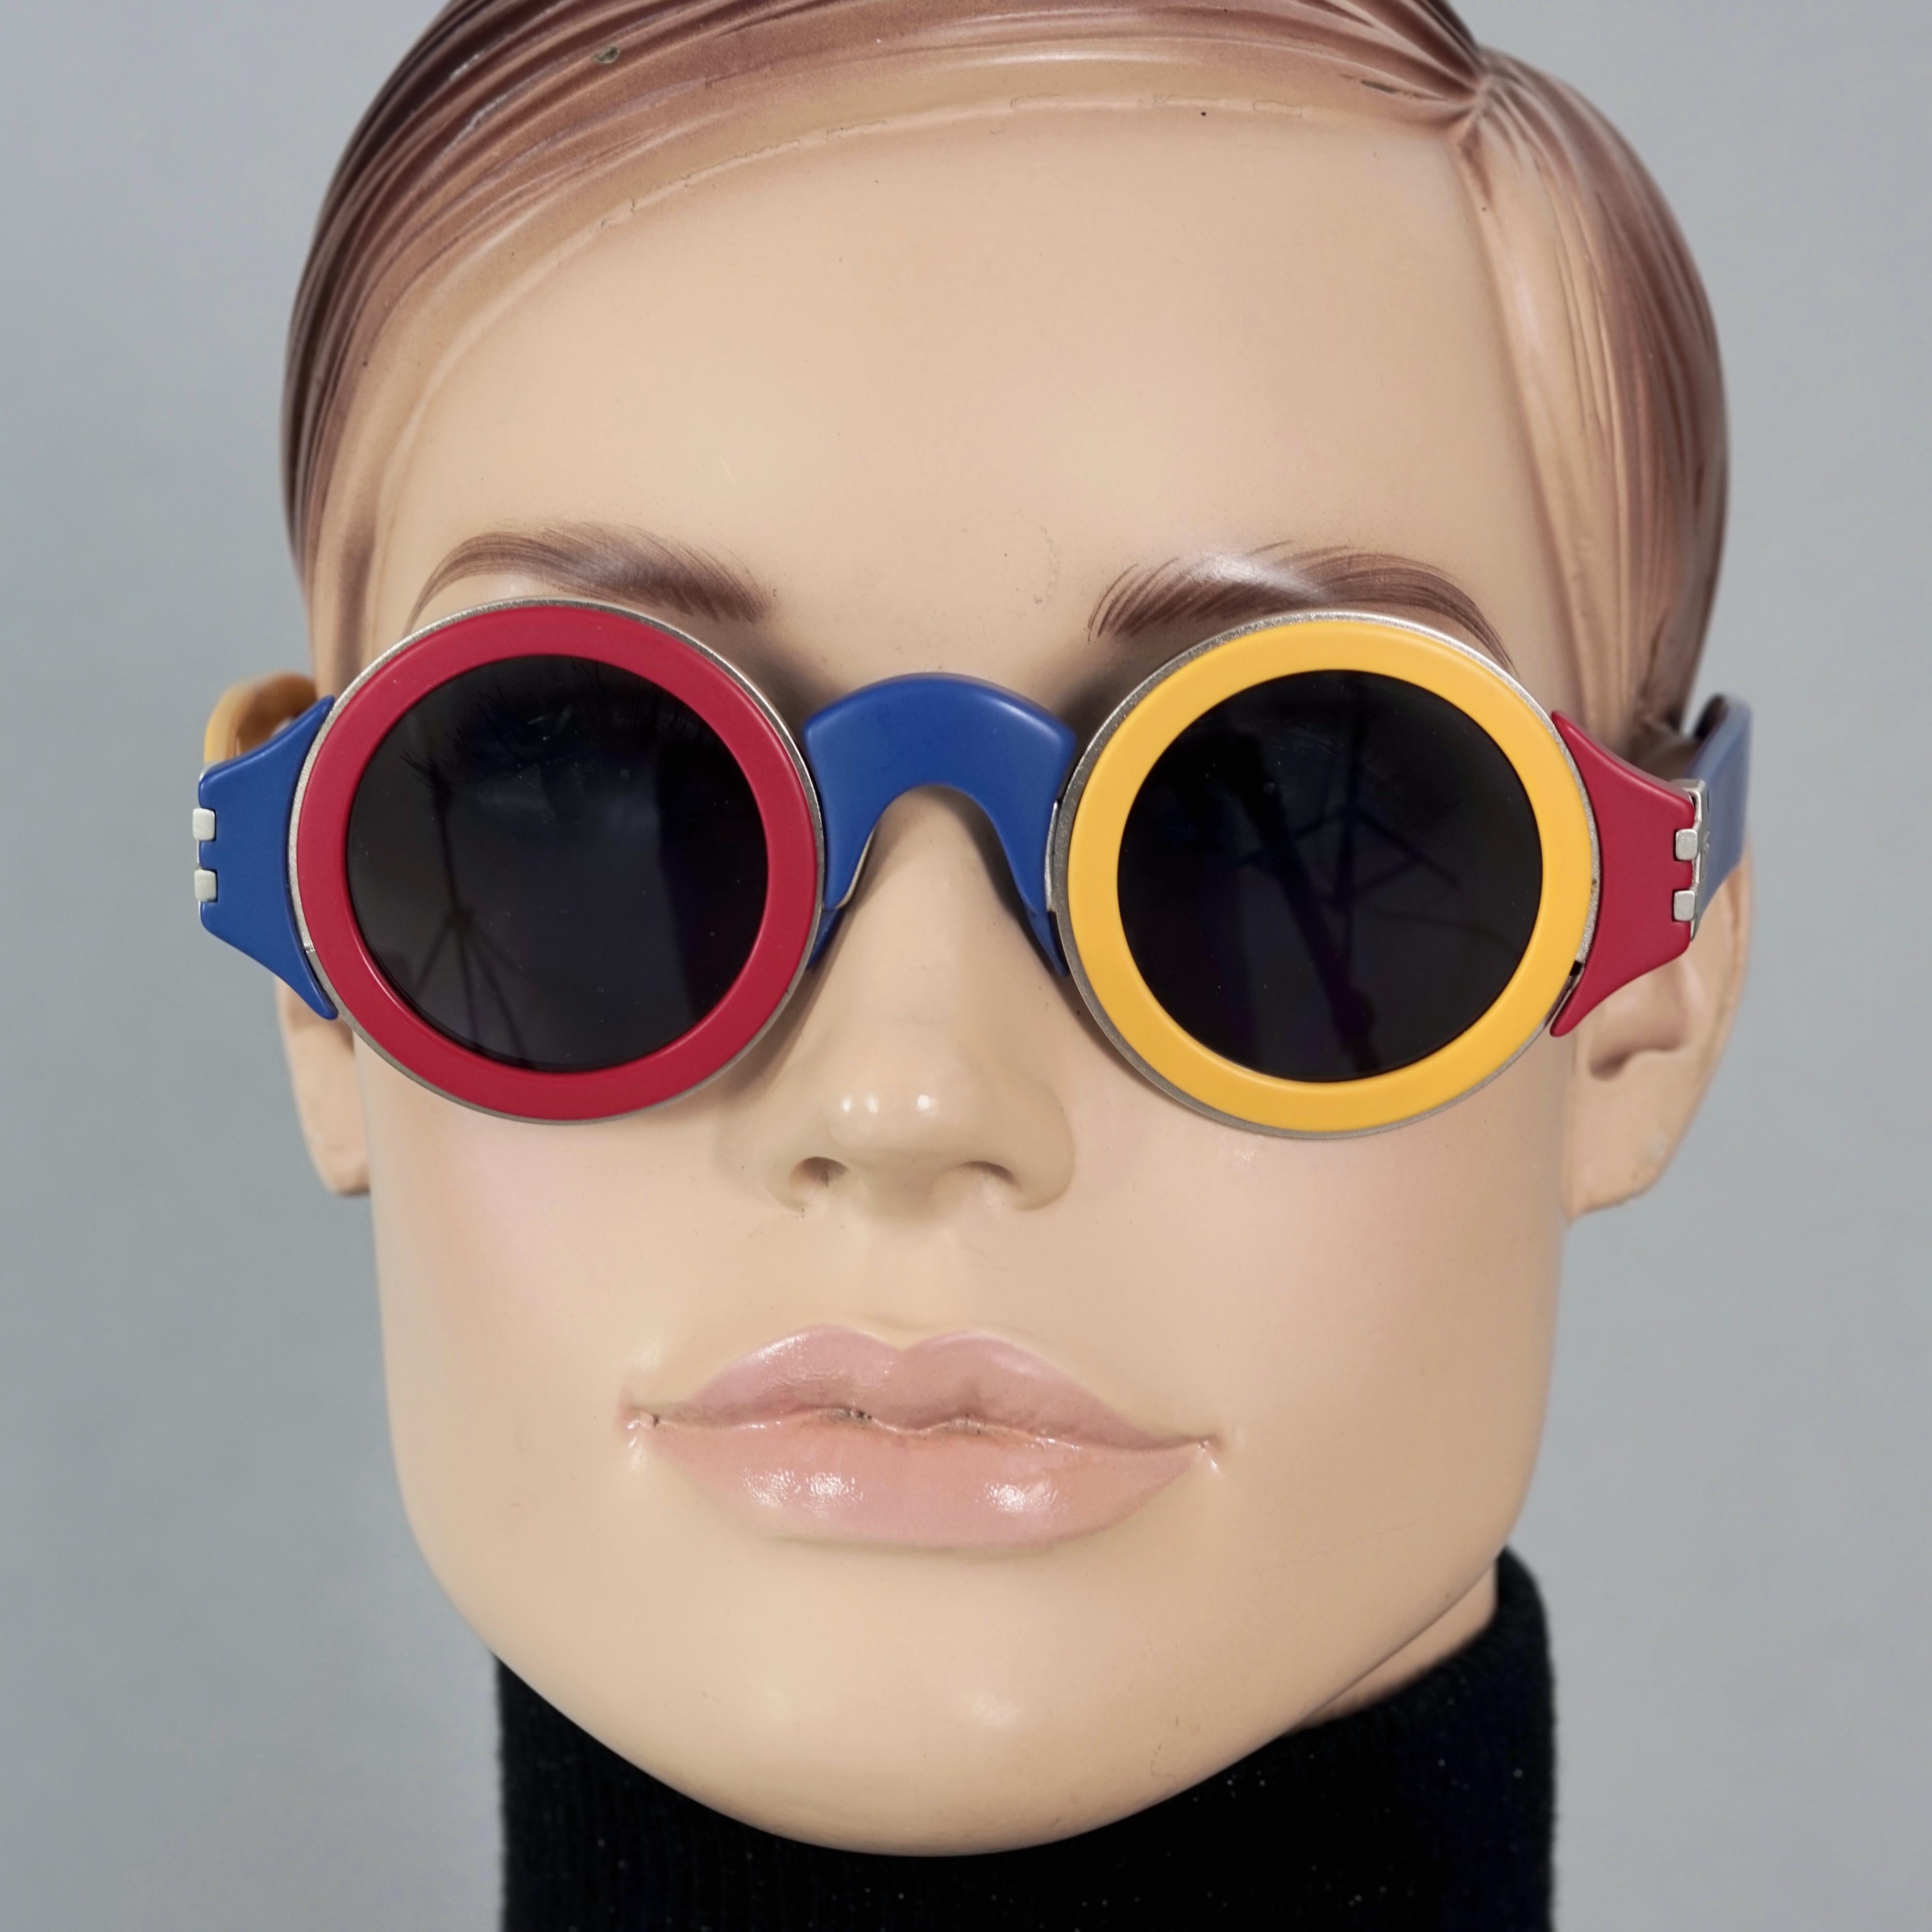 Vintage 1985 KARL LAGERFELD Color Block Limited Edition Sunglasses
Only 2000 pieces were made. This is numbered 0742/ 2000.

Measurements:
Frame Height: 1.96 inches (5 cm)
Hinge to hinge Width: 5.51 inches (14 cm)
Temples: 5.39 inches (13.7